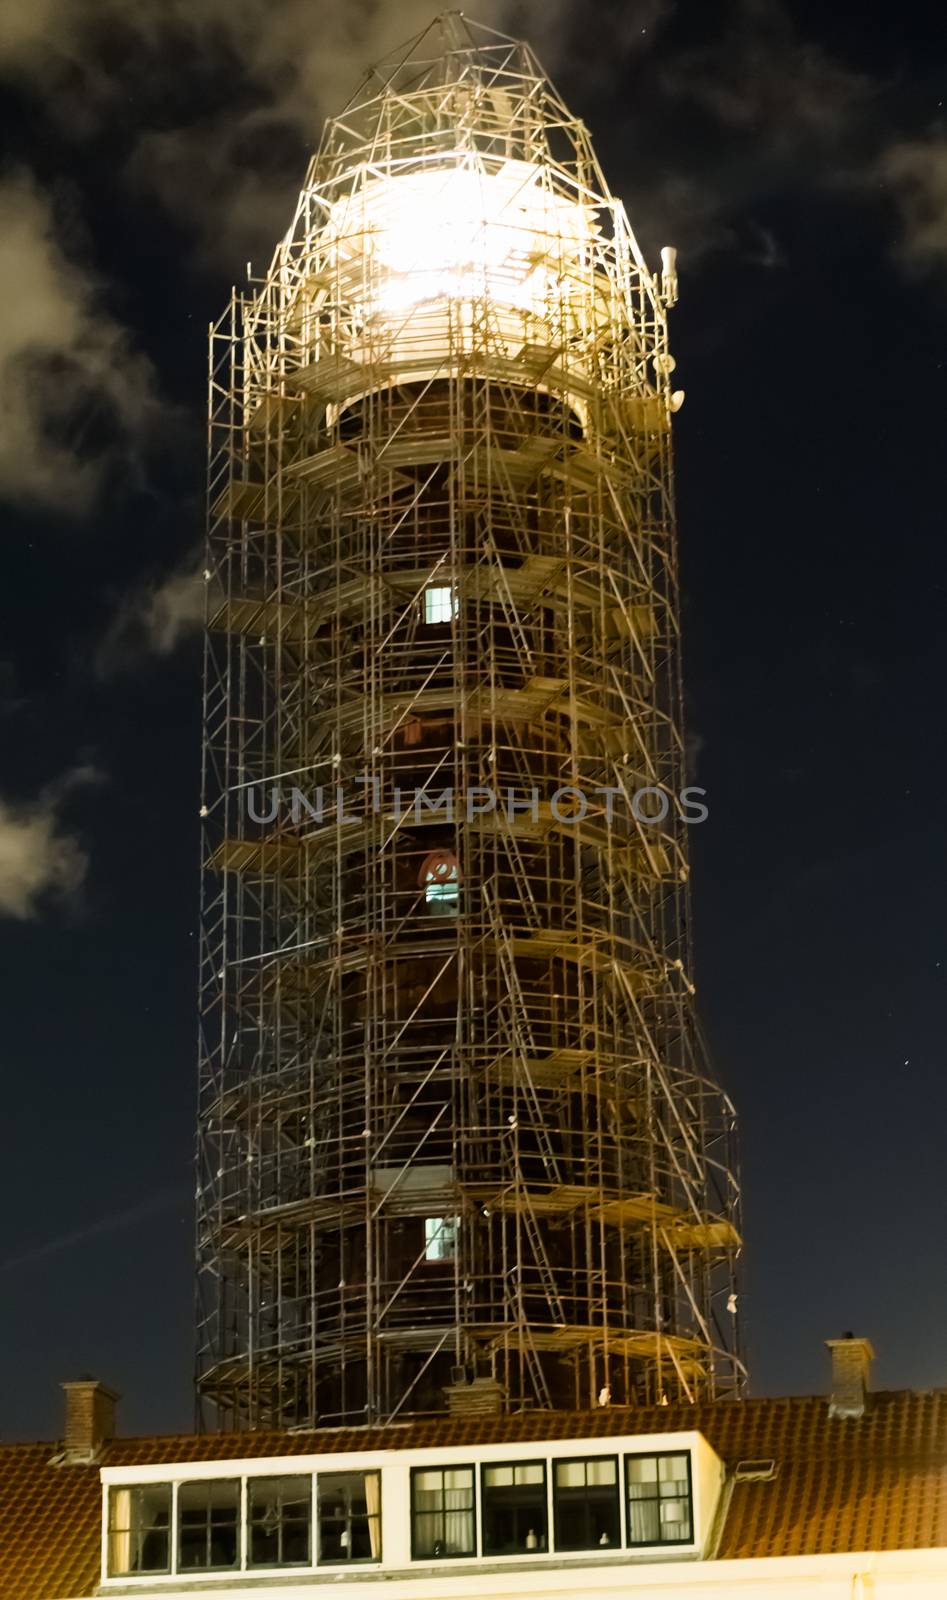 lighthouse in scaffolding for construction with the light shining at night by charlottebleijenberg